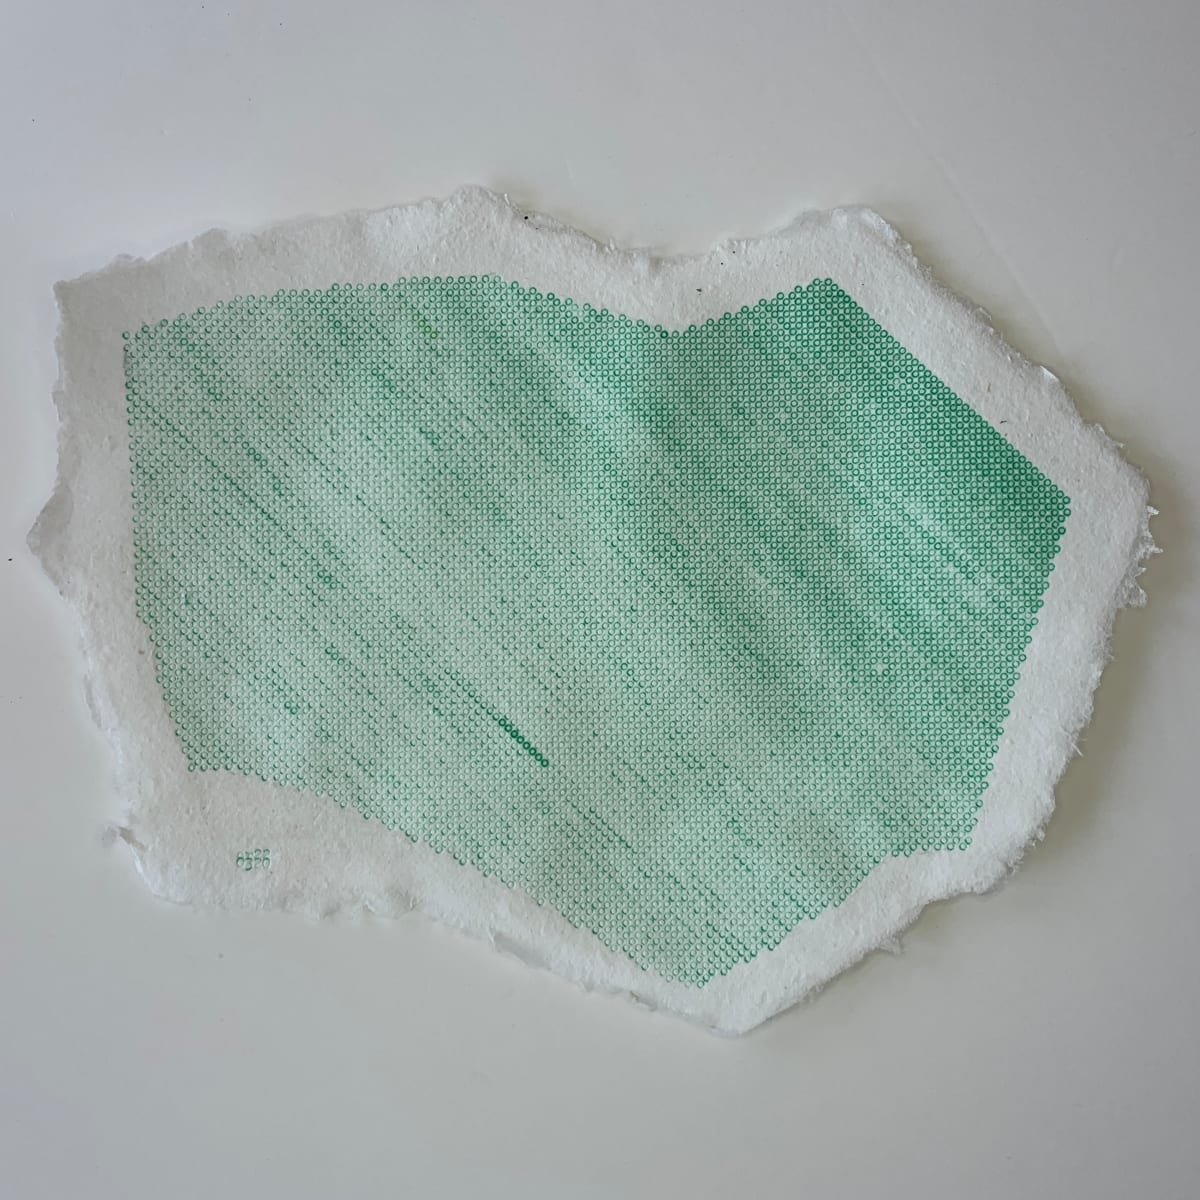 color study on polygonal handmade paper: green by Chad Reynolds 